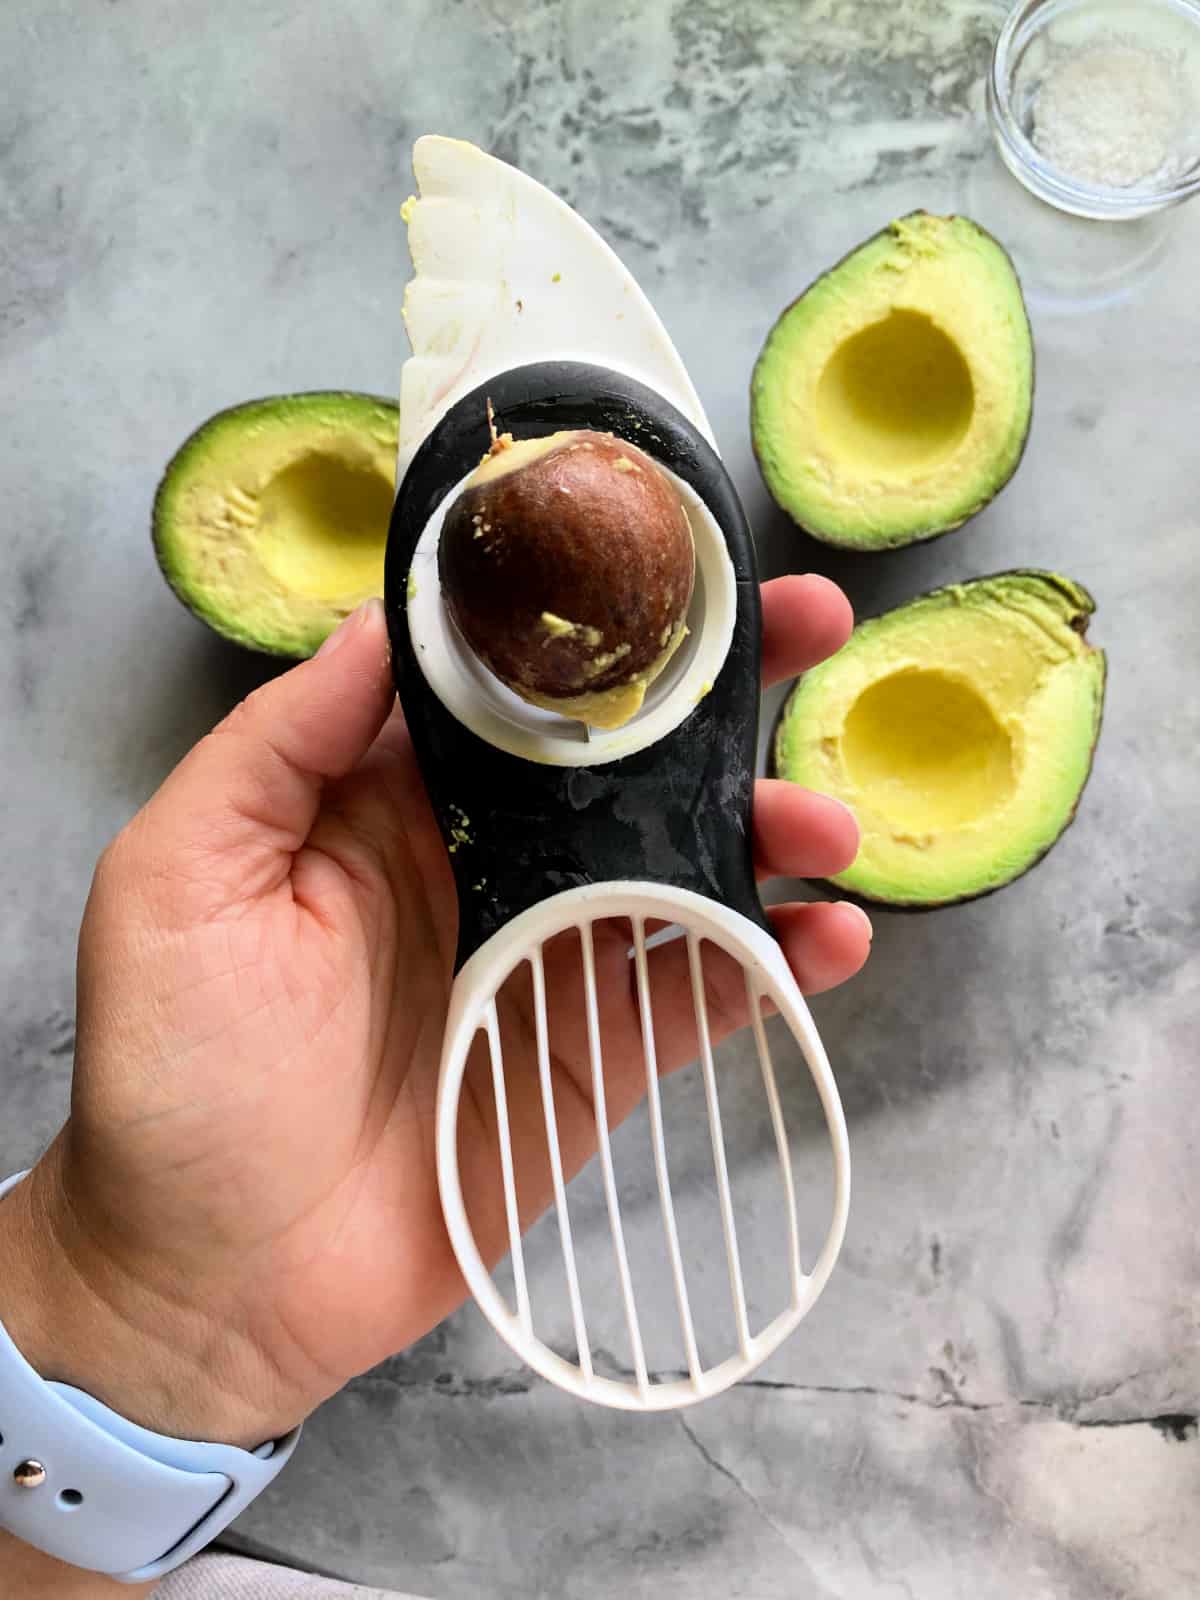 Hand holding avocado slicer with avocado pit in slicer with avocados on counter.